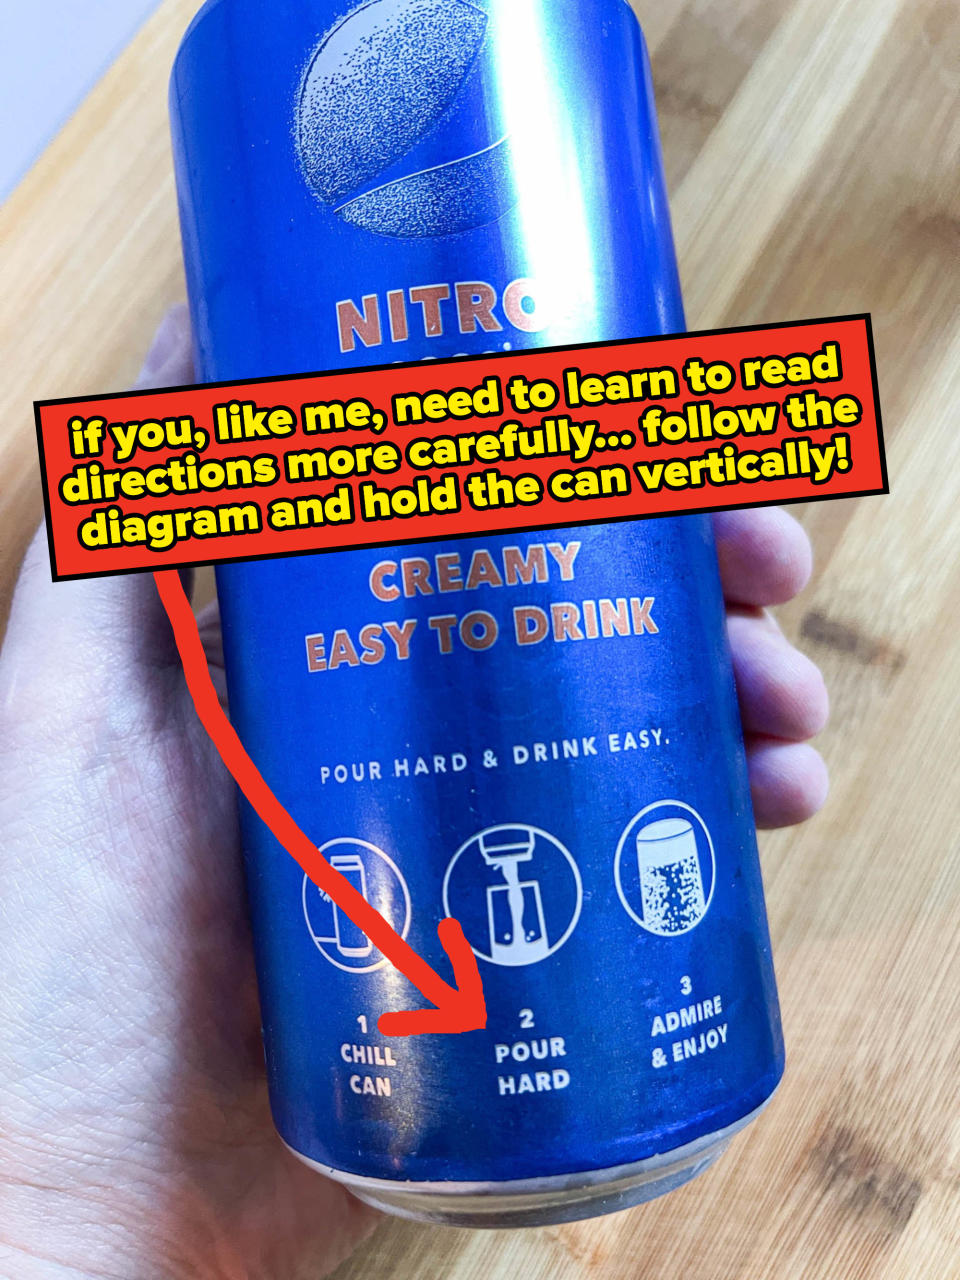 arrow pointing to a direction on the can instructing people to hold can vertically while pouring